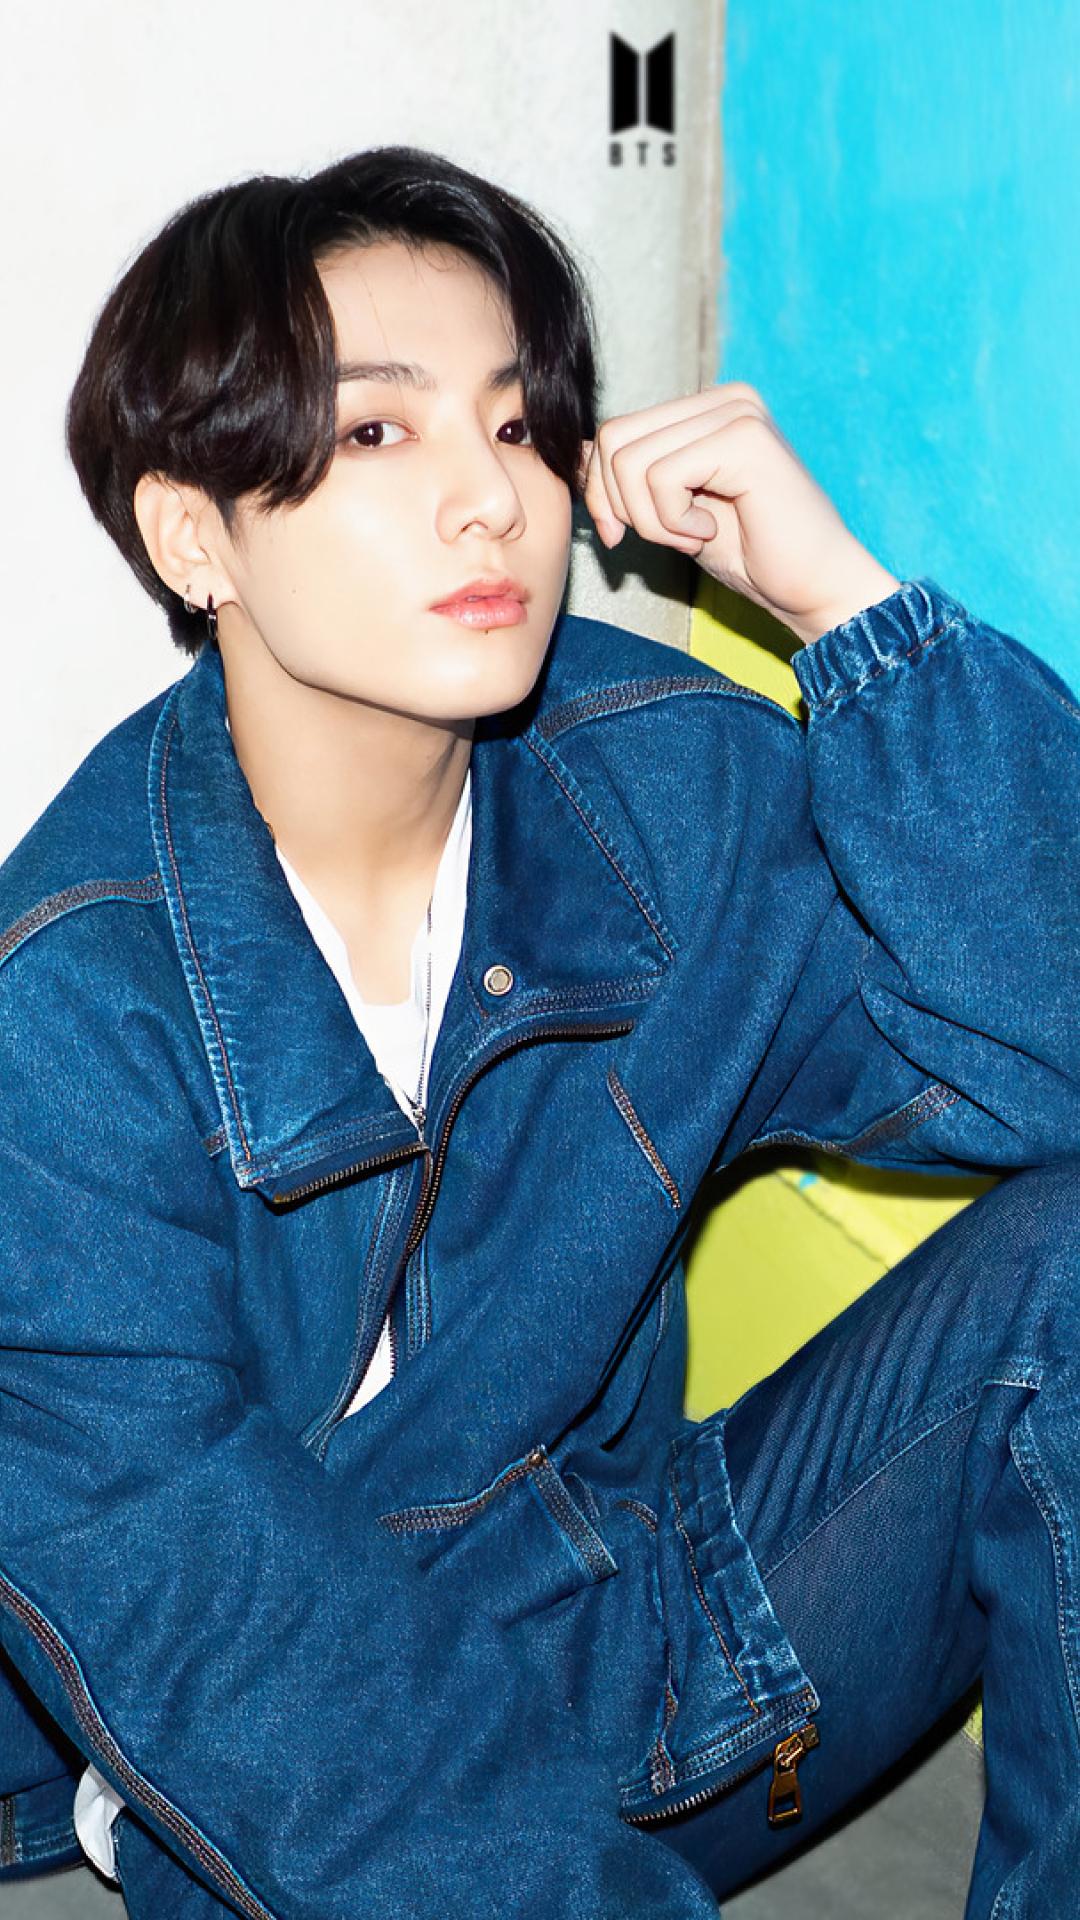 The 16 Facts About Jungkook Wallpaper Pc Hd Bts jung kook computer 